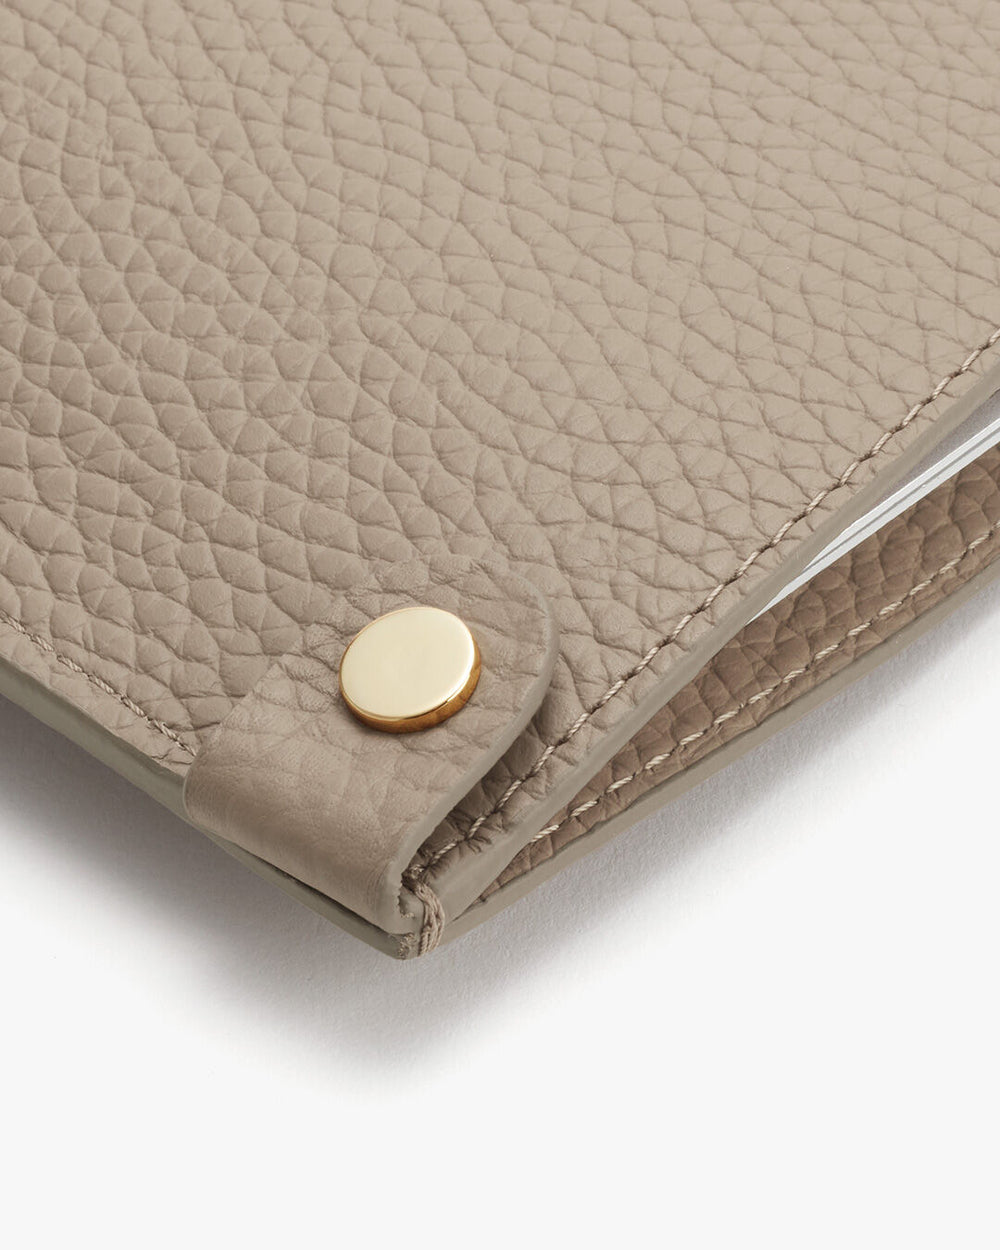 Close-up of a textured wallet with a snap button closure.